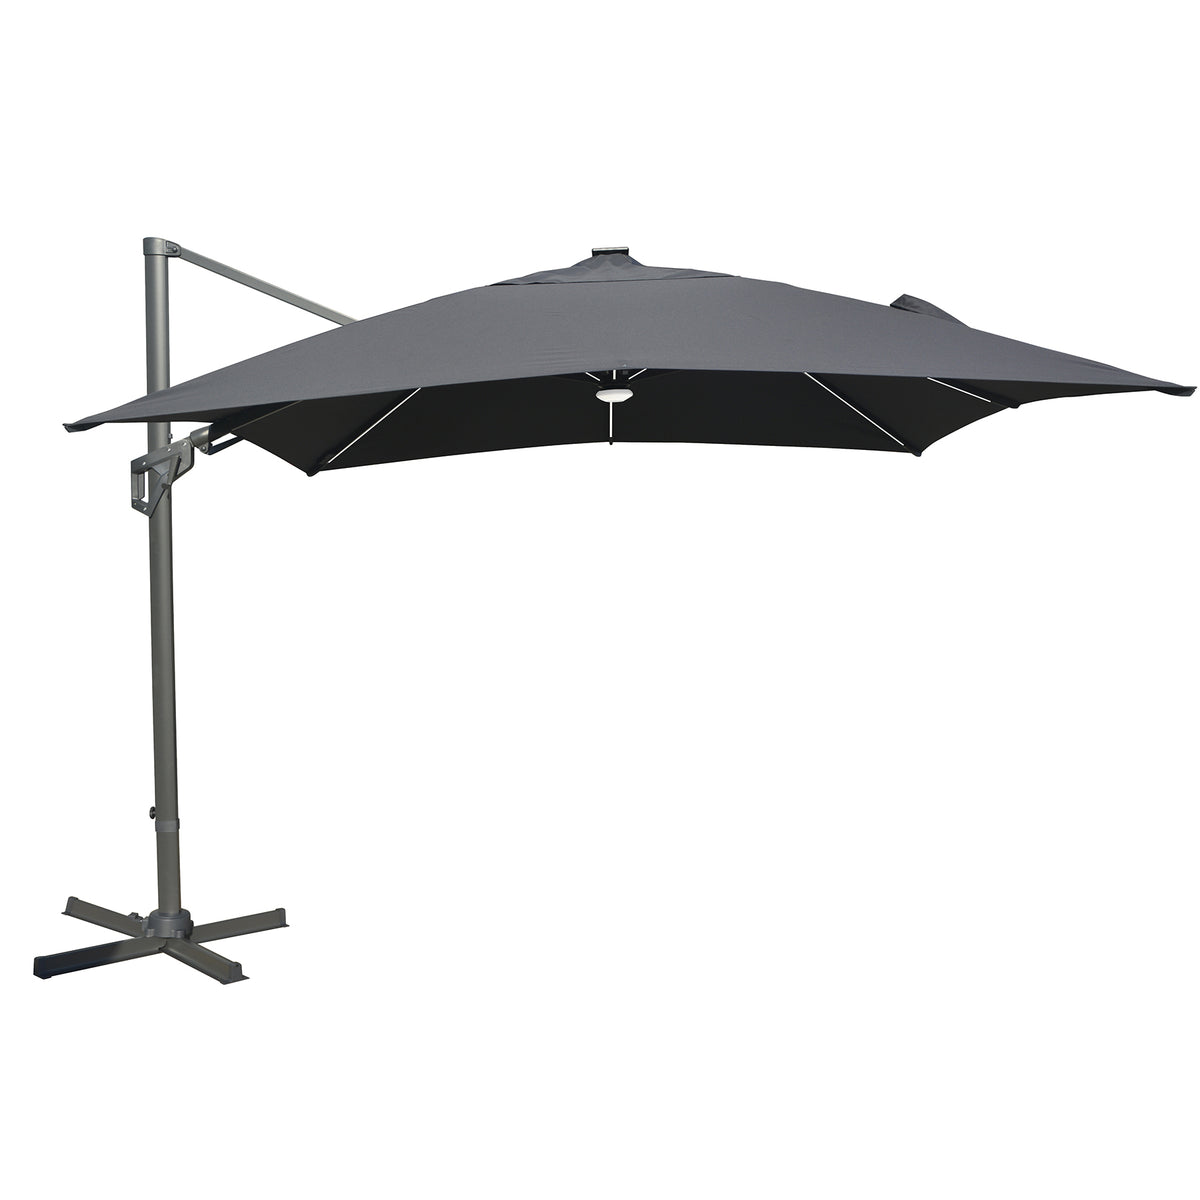 Bracken Outdoors Napoli Grey 3m x 3m Square Cantilever Parasol With LED Lights